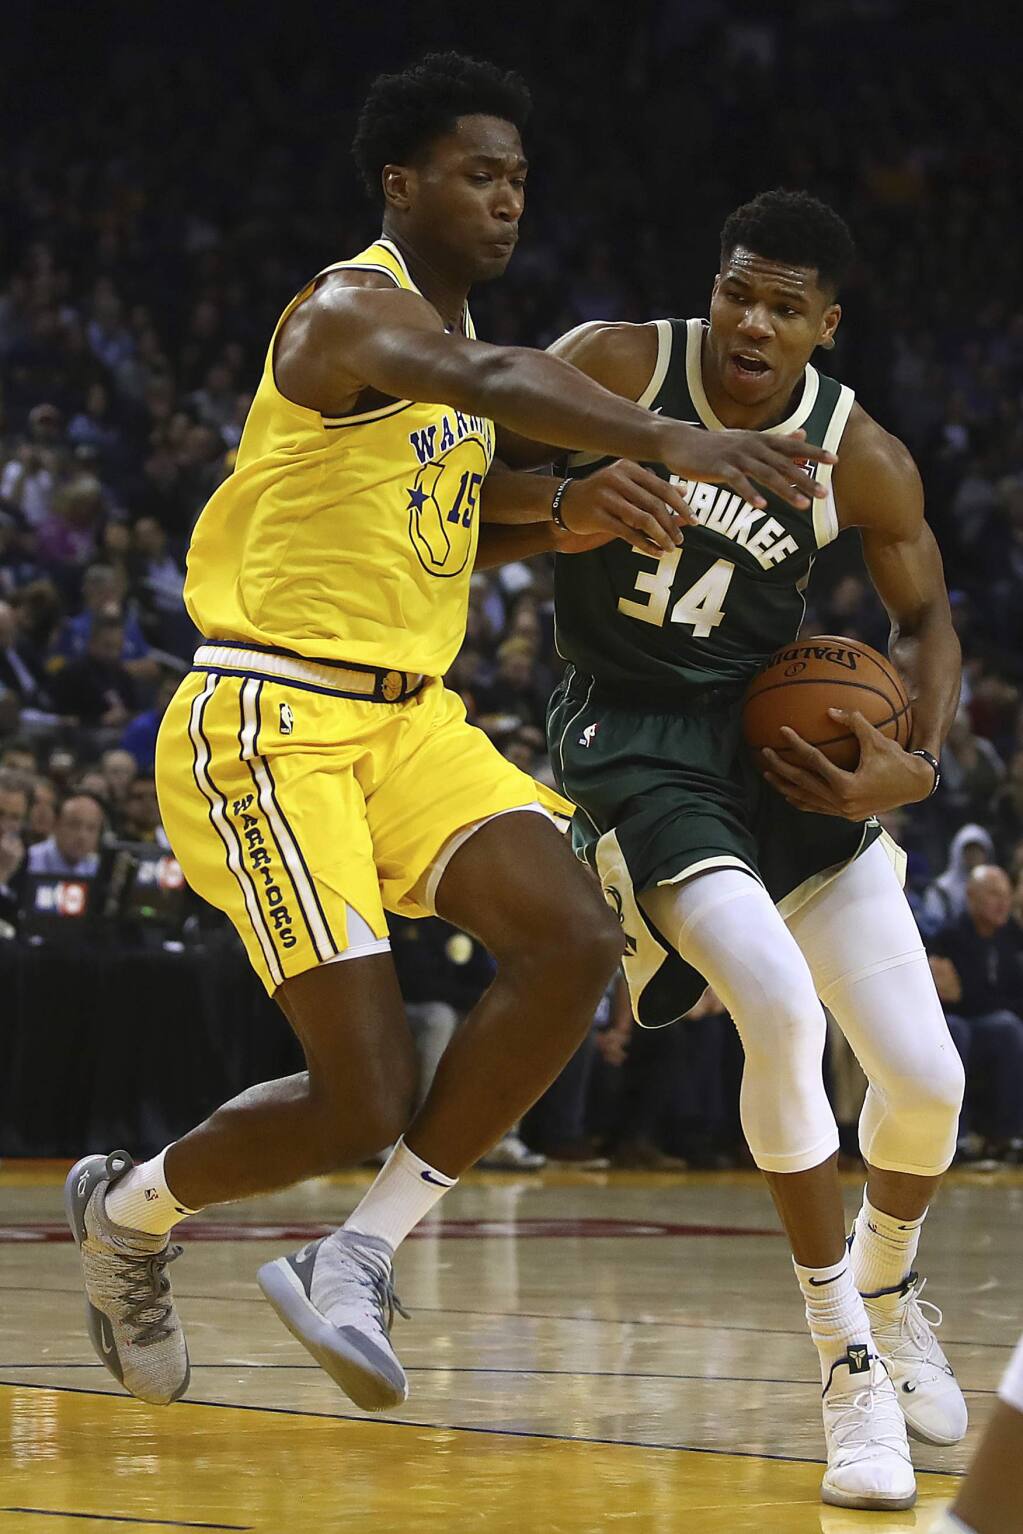 Arms and legs and hands and desire': Giannis Antetokounmpo's early